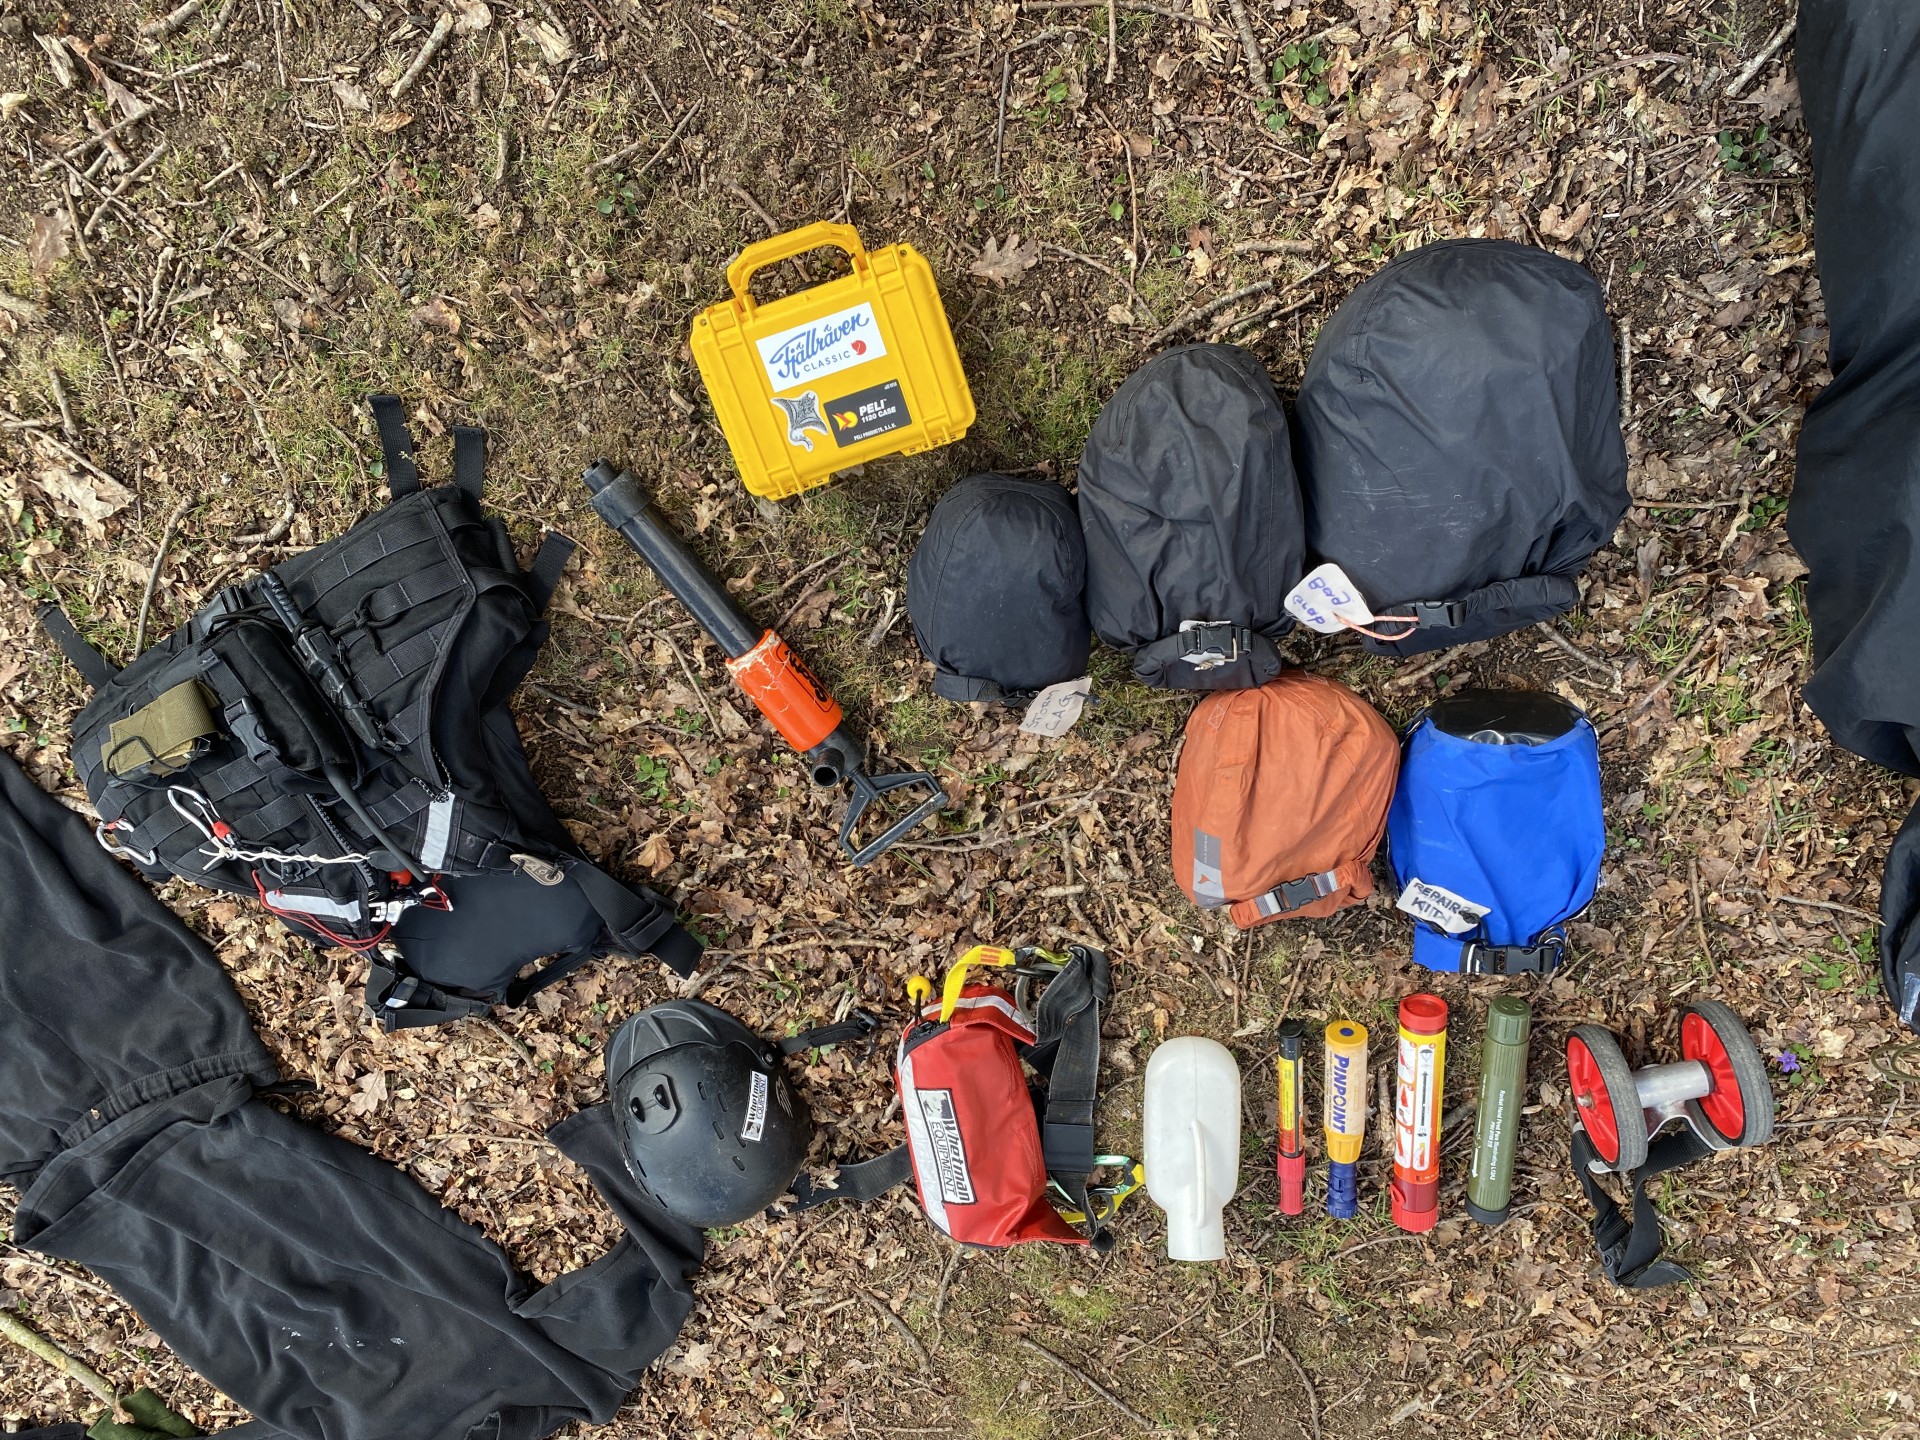 Sea kayaking equipment laid out, including emergency flares.